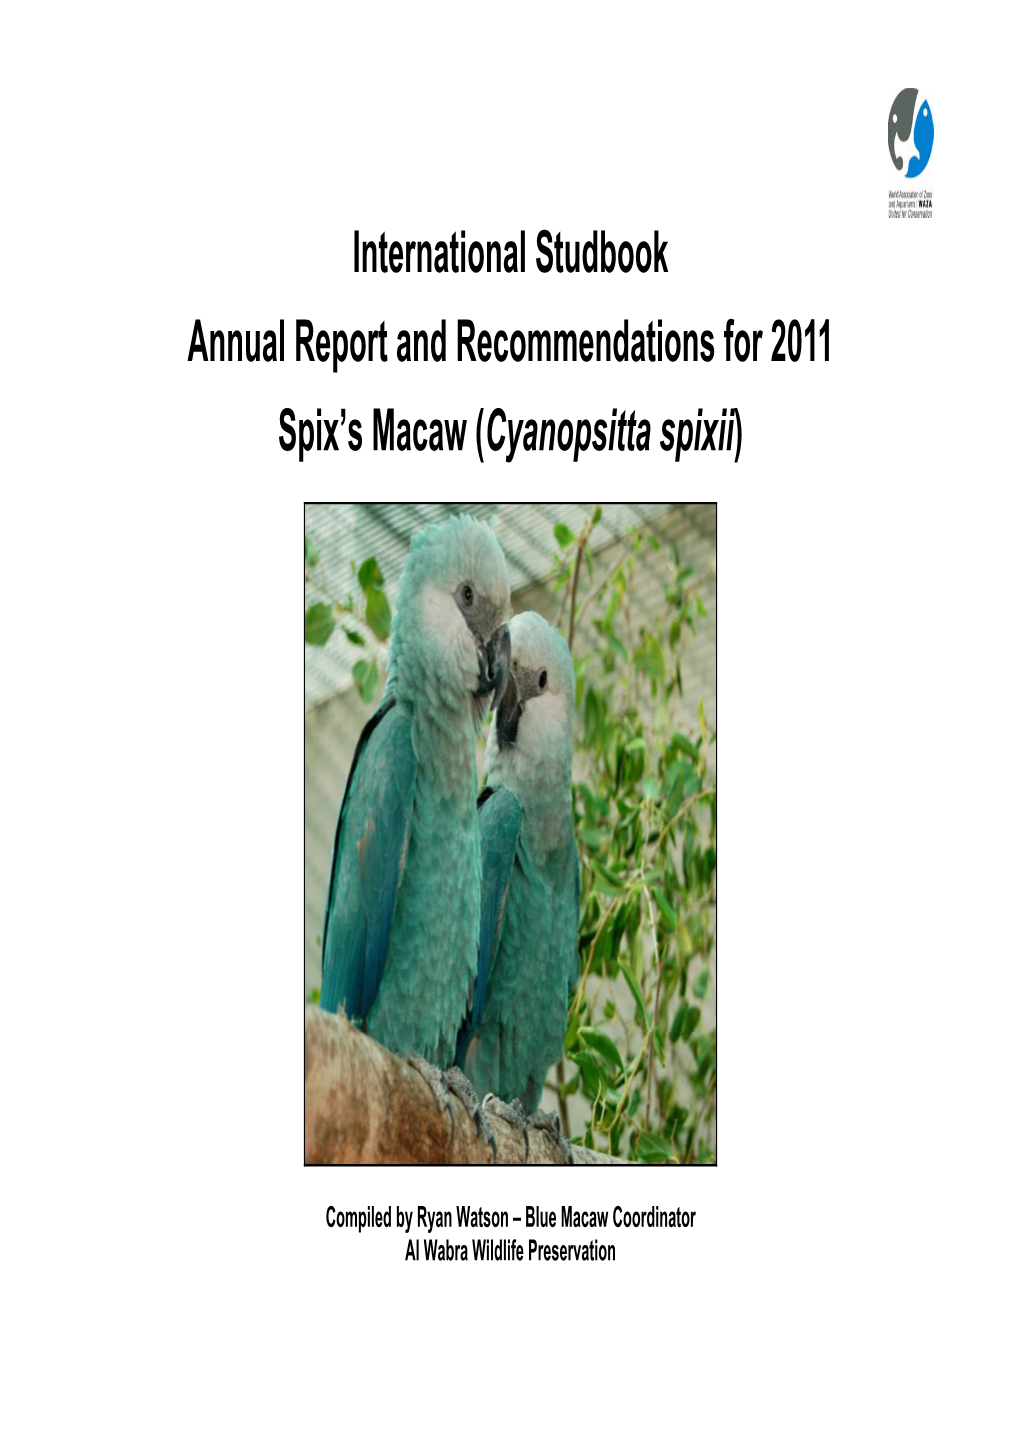 International Studbook Annual Report and Recommendations for 2011